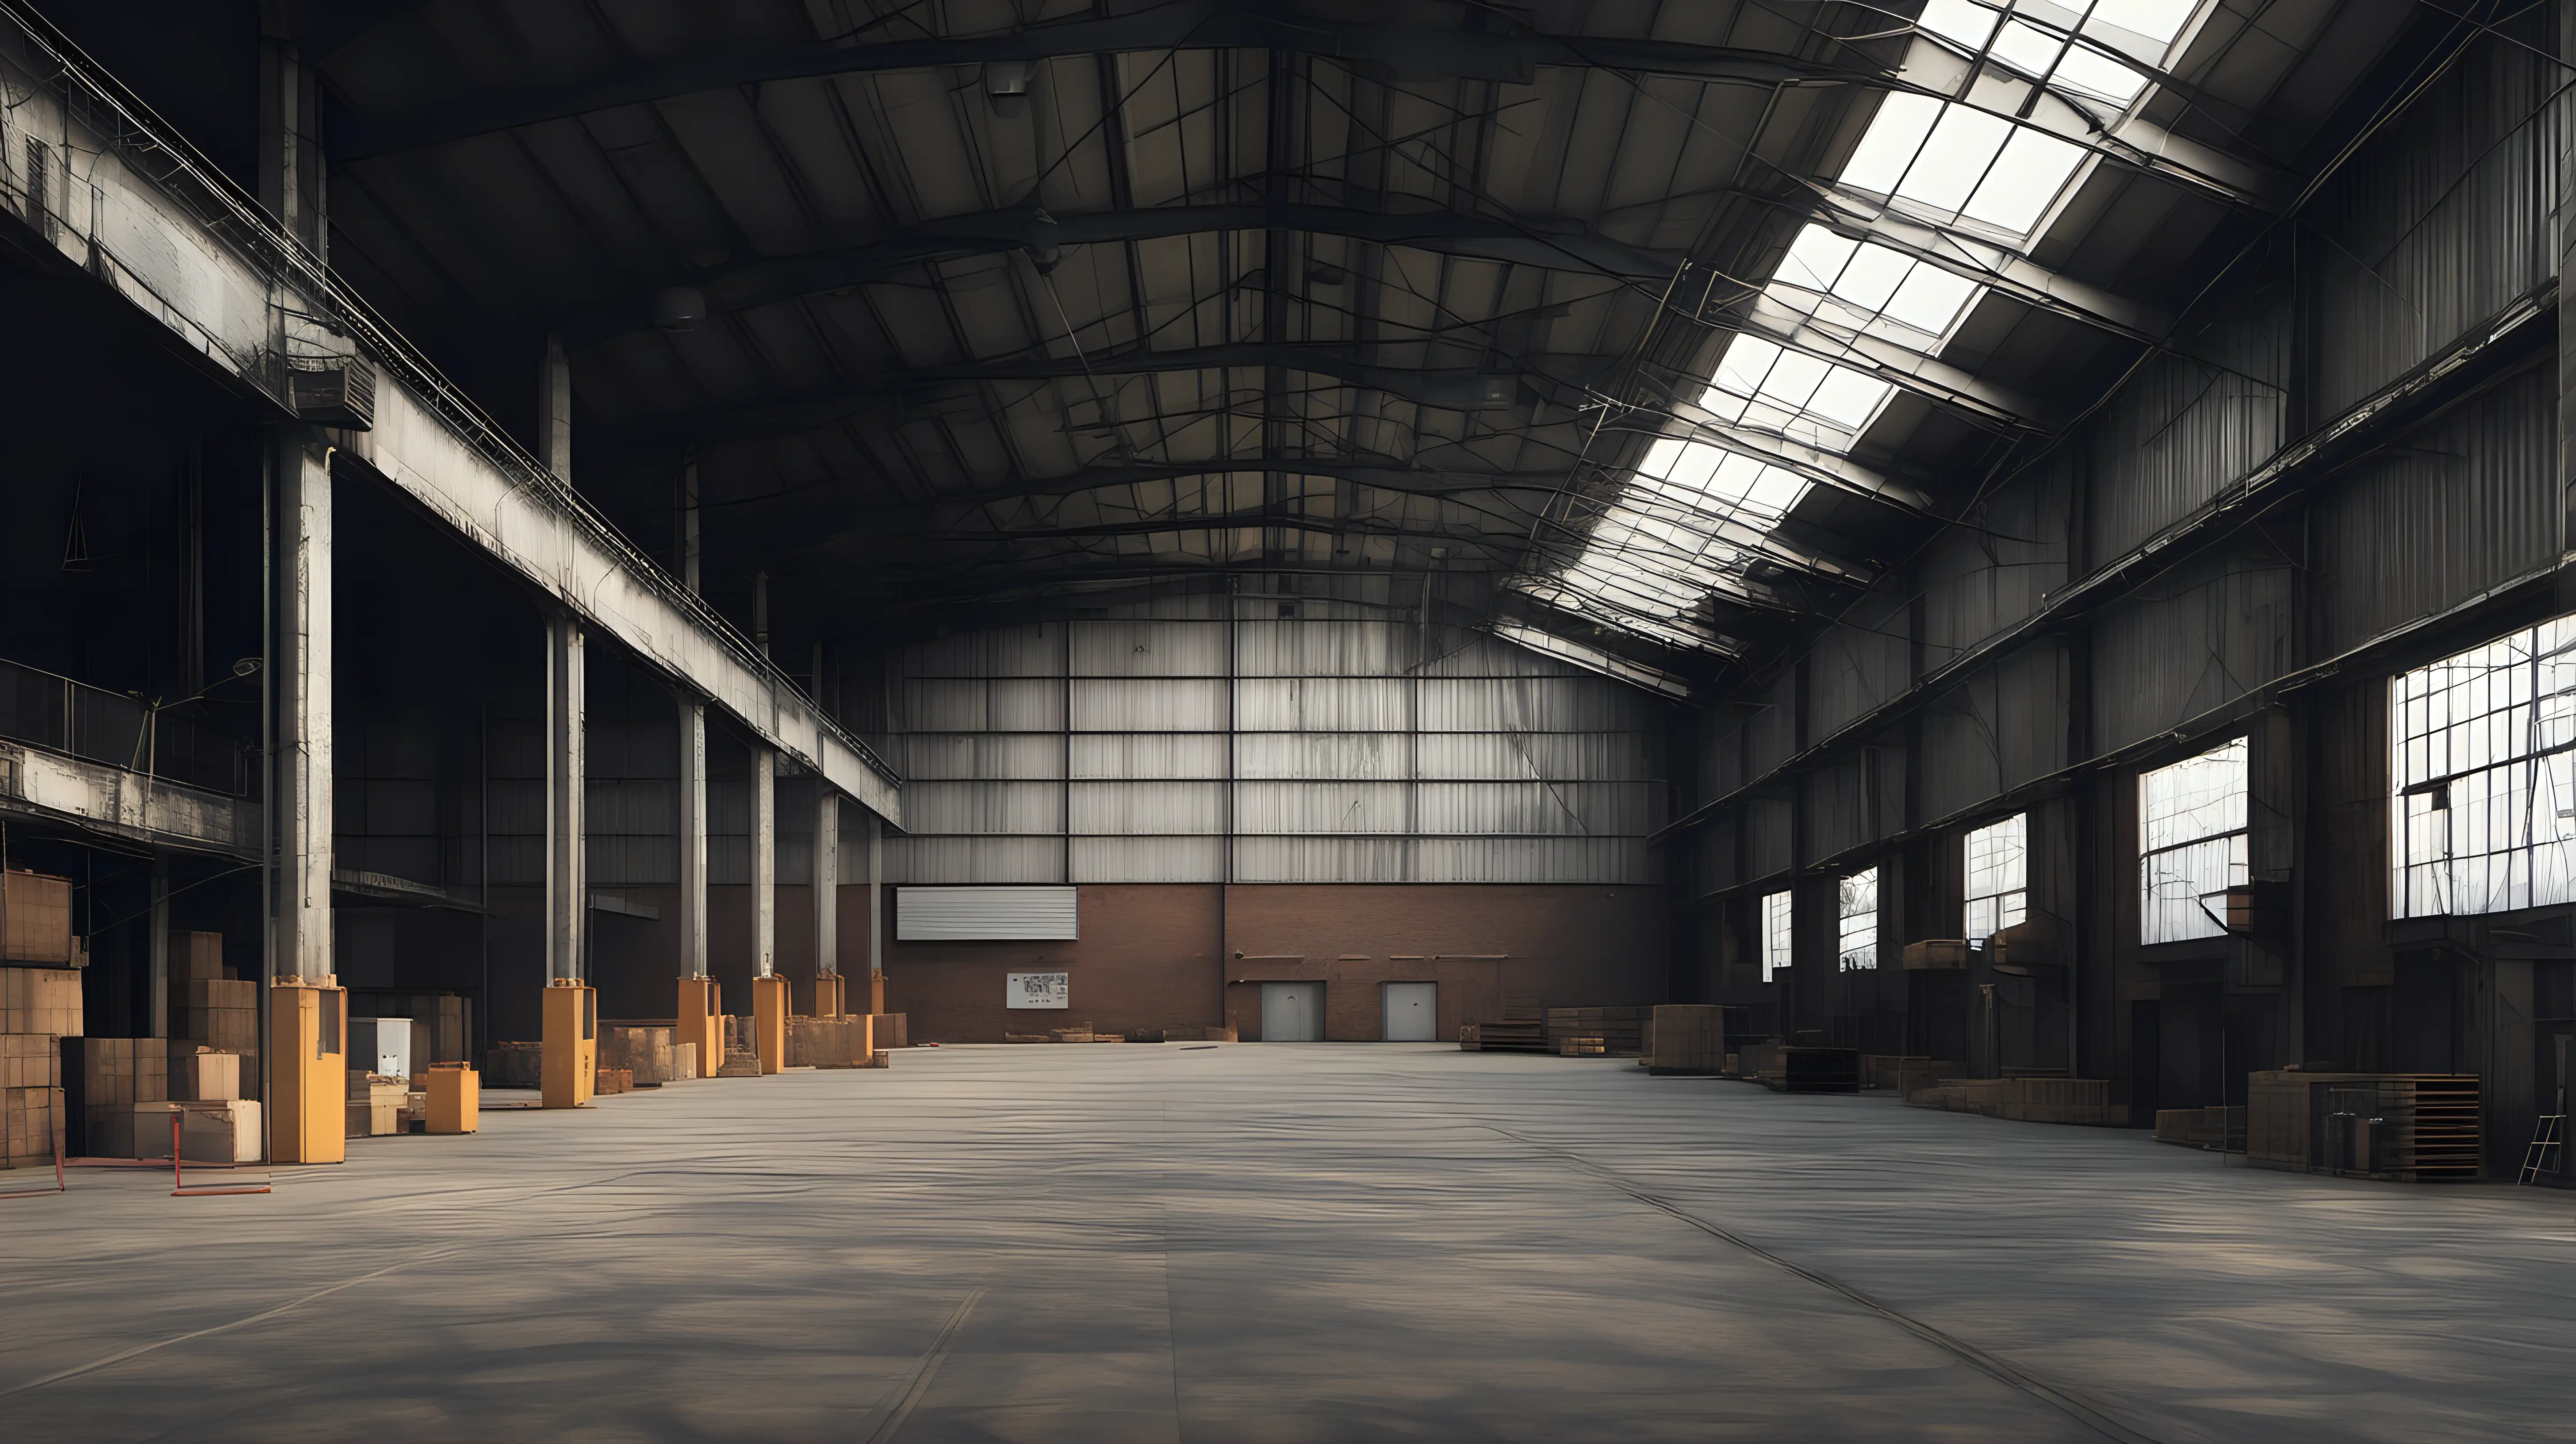 Gritty Urban Warehouse with Industrial Vibes